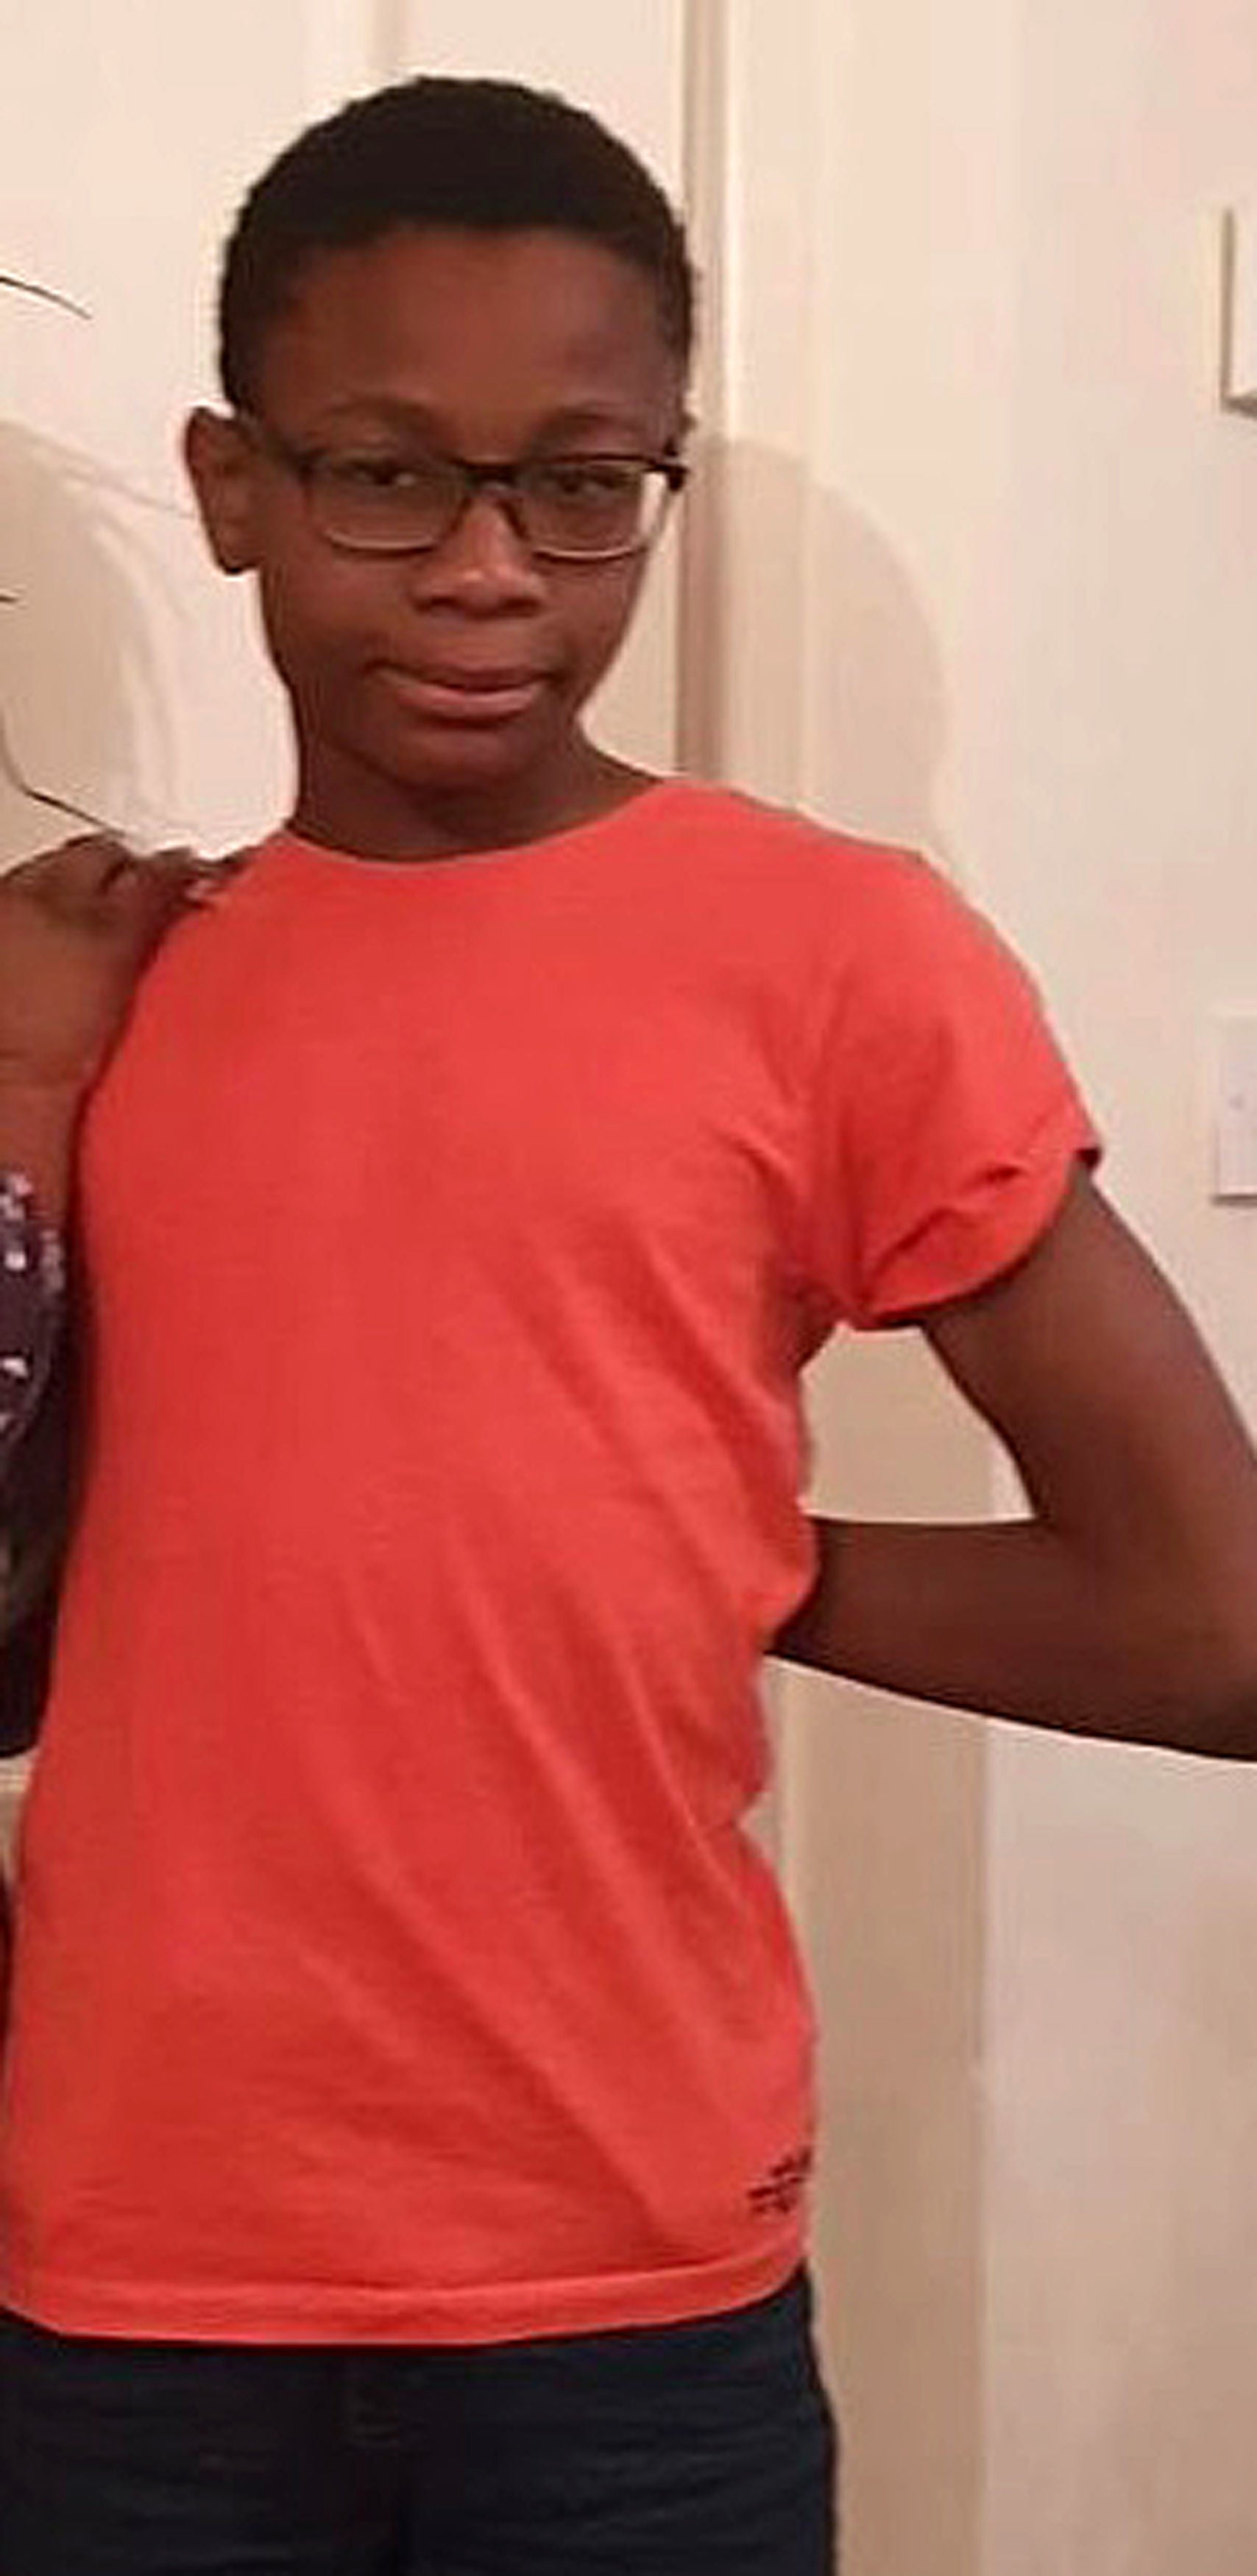 Christopher Kapessa, 13, who died after he was allegedly pushed into the River Cynon near Fernhill, Rhondda Cynon Taff, by a 14-year-old boy in July 2019 (Family handout/South Wales Police/PA)